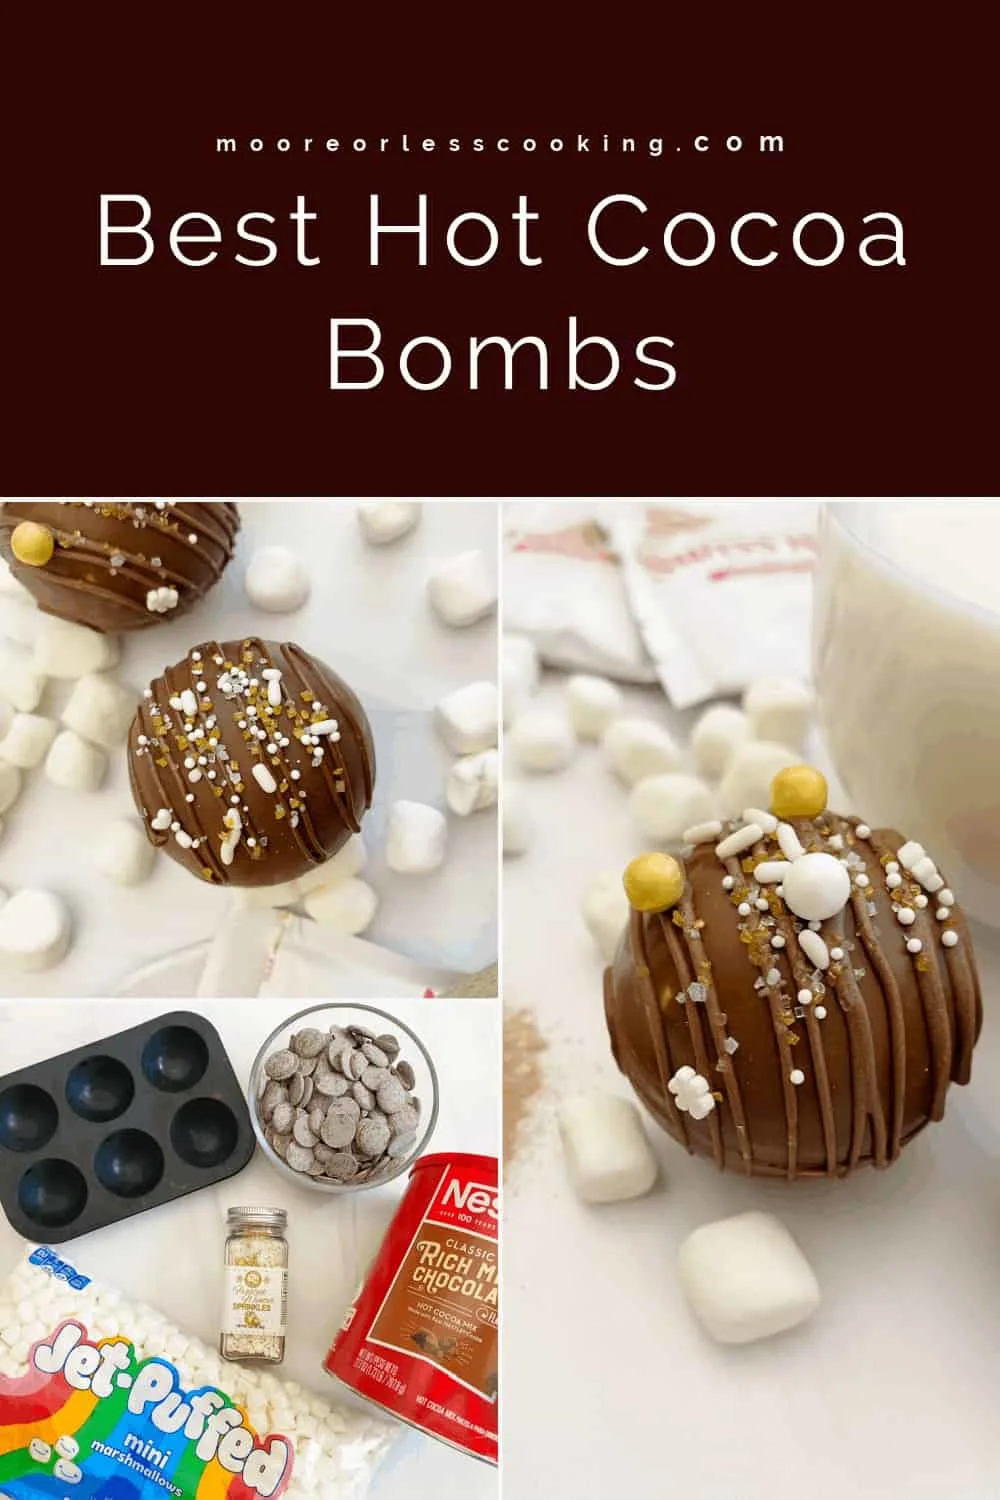 Filled with cocoa mix and marshmallows, these hot cocoa bombs are an adorable way to make a mug of cozy hot chocolate. Kids as well as adults love the chocolate explosion of deliciousness that magically turns into everyone’s favorite warm beverage. via @Mooreorlesscook